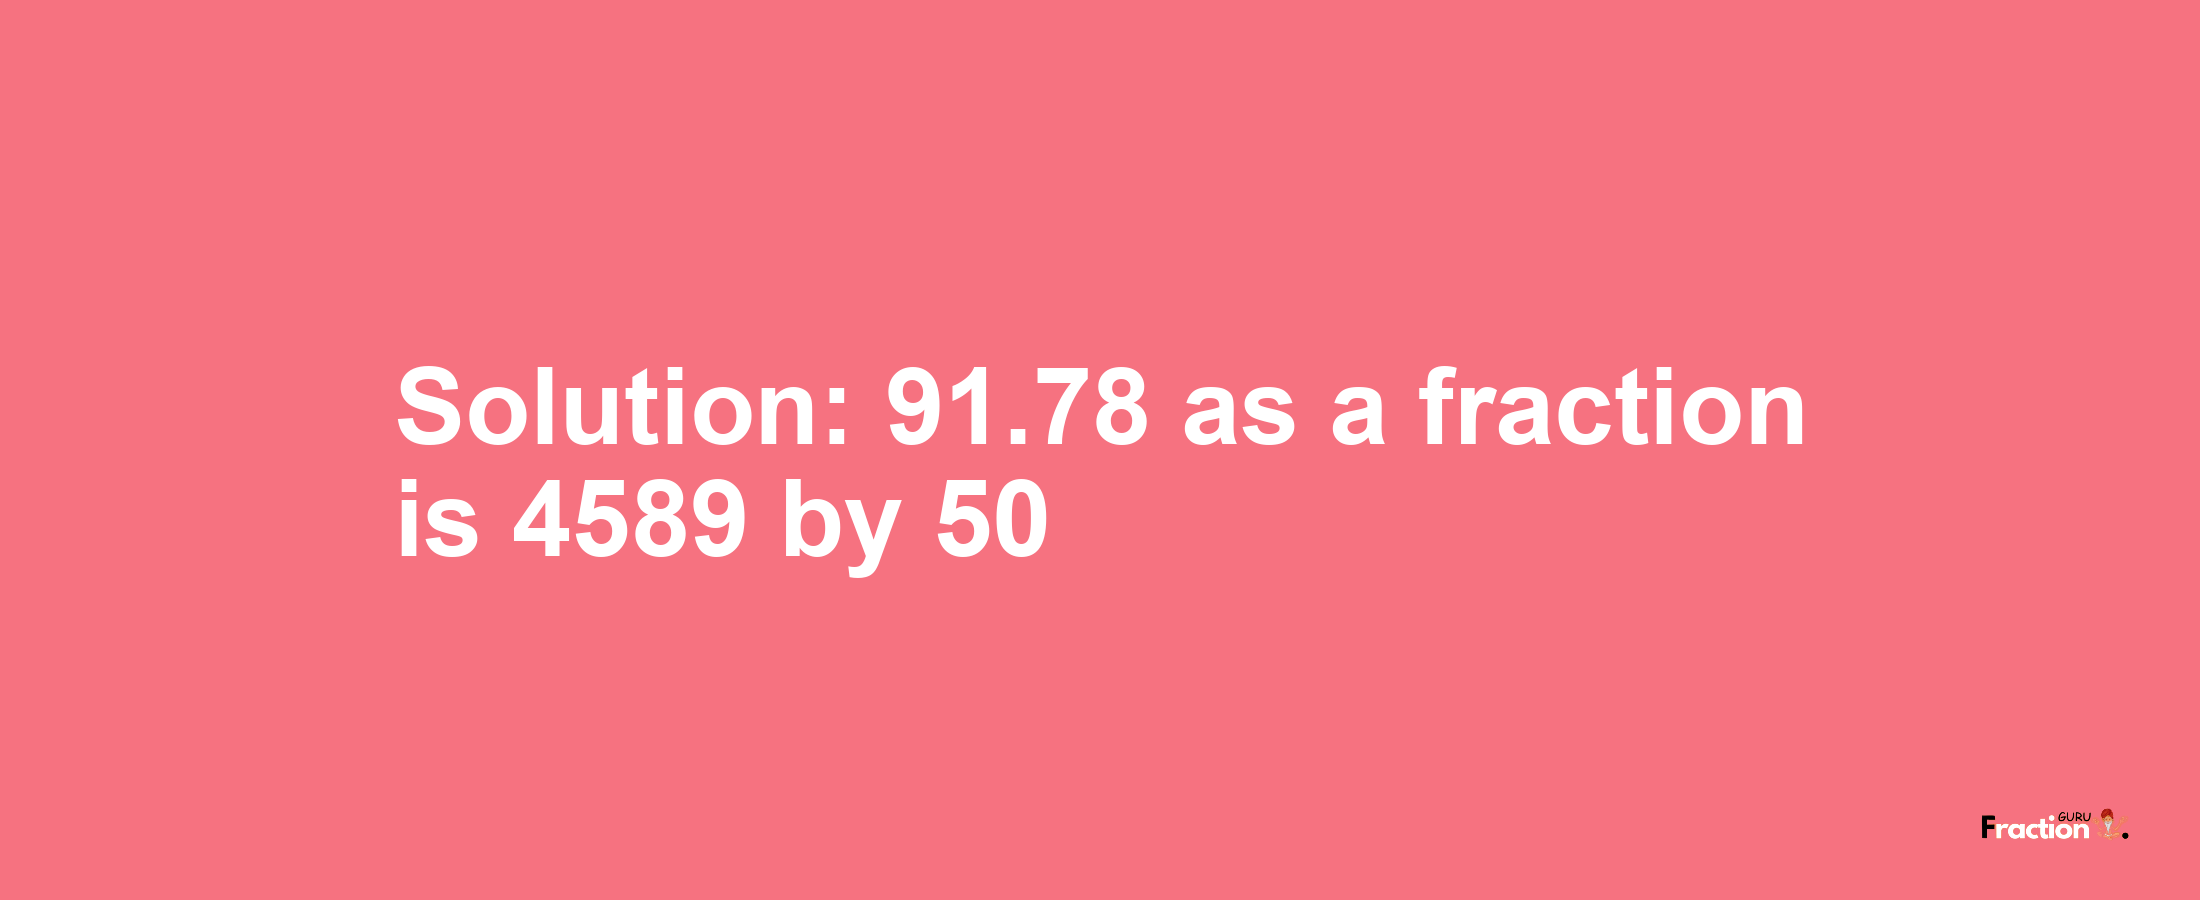 Solution:91.78 as a fraction is 4589/50